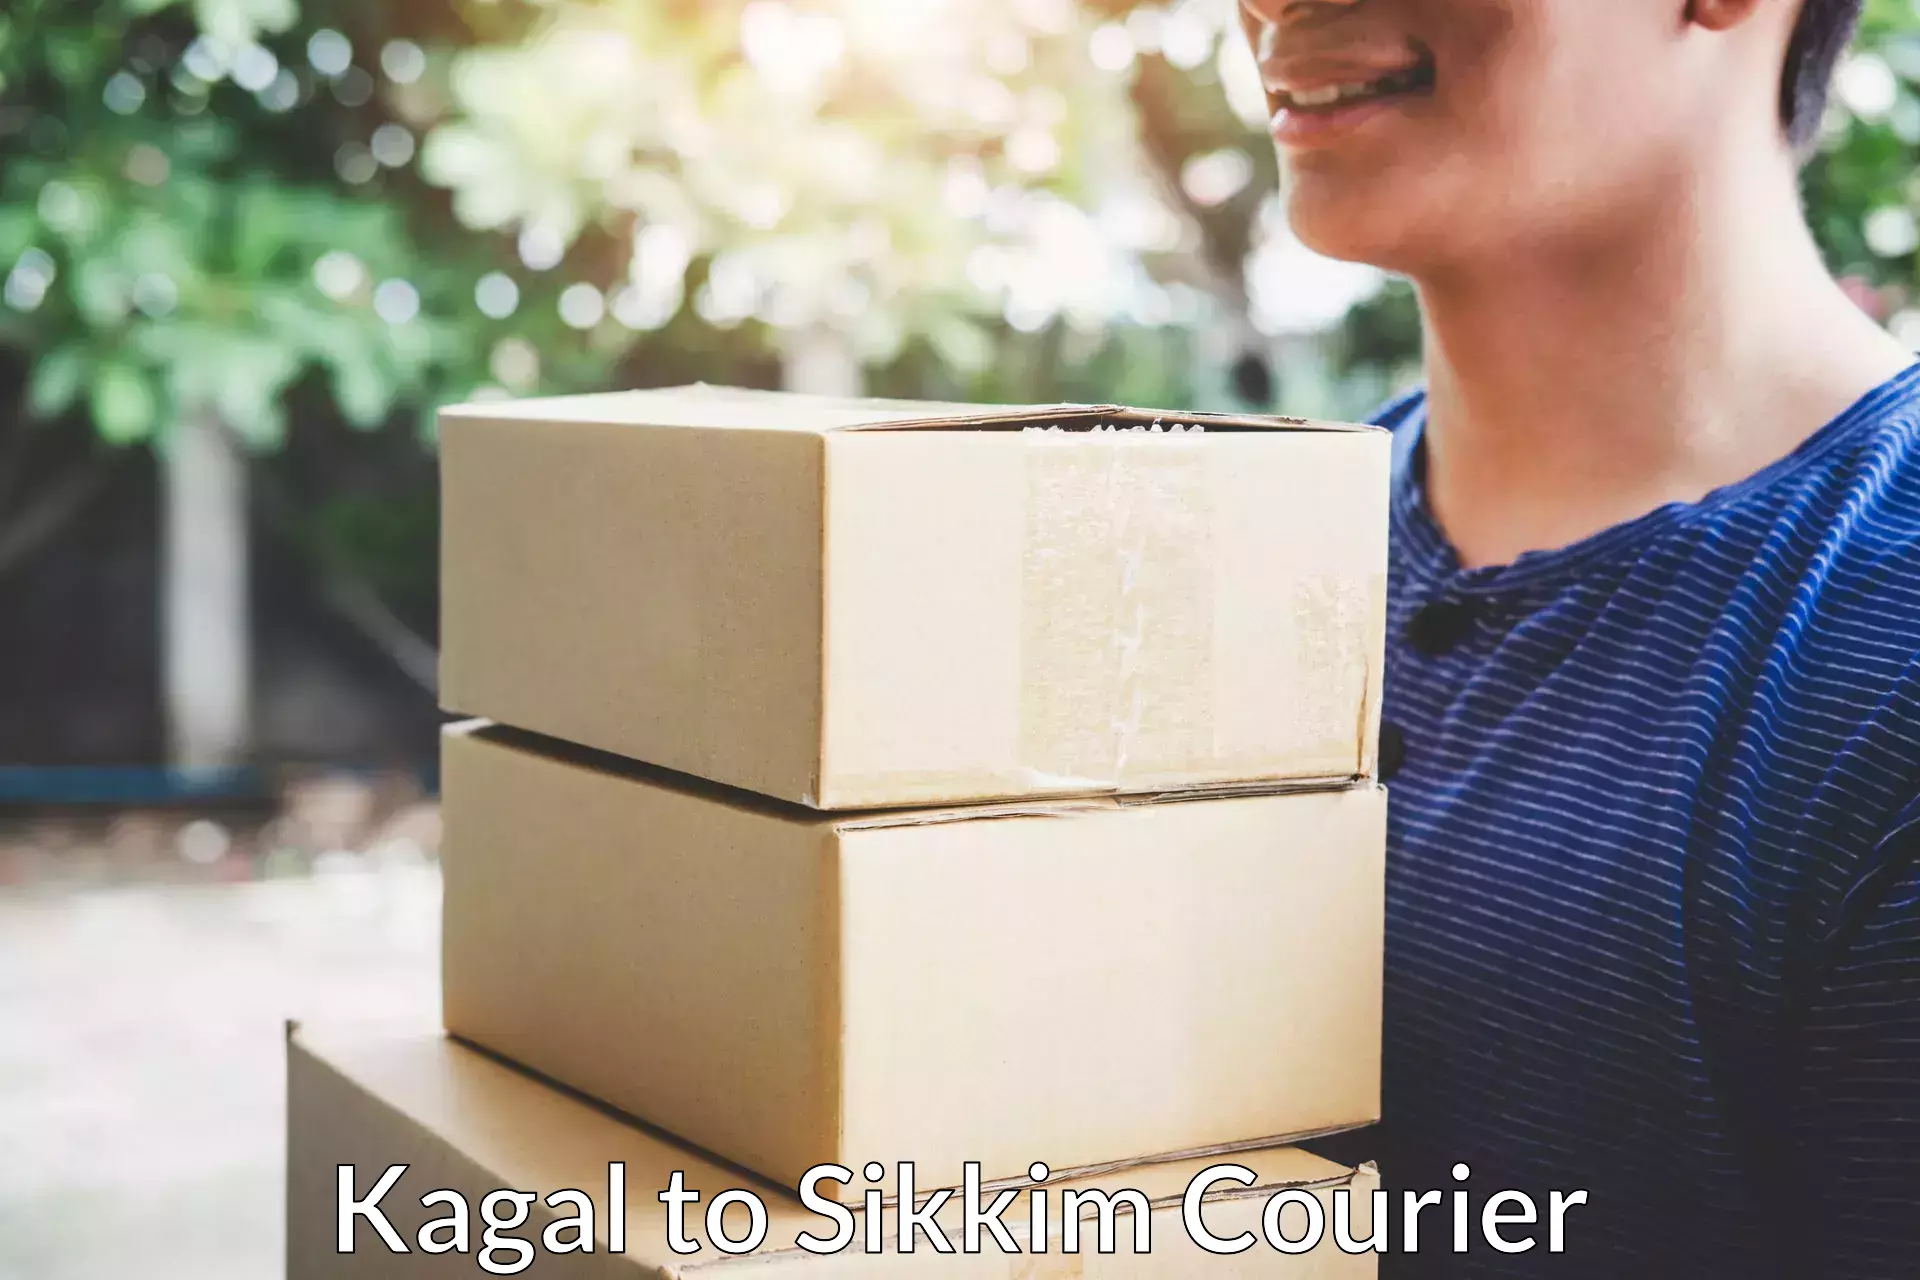 Professional furniture movers in Kagal to Sikkim